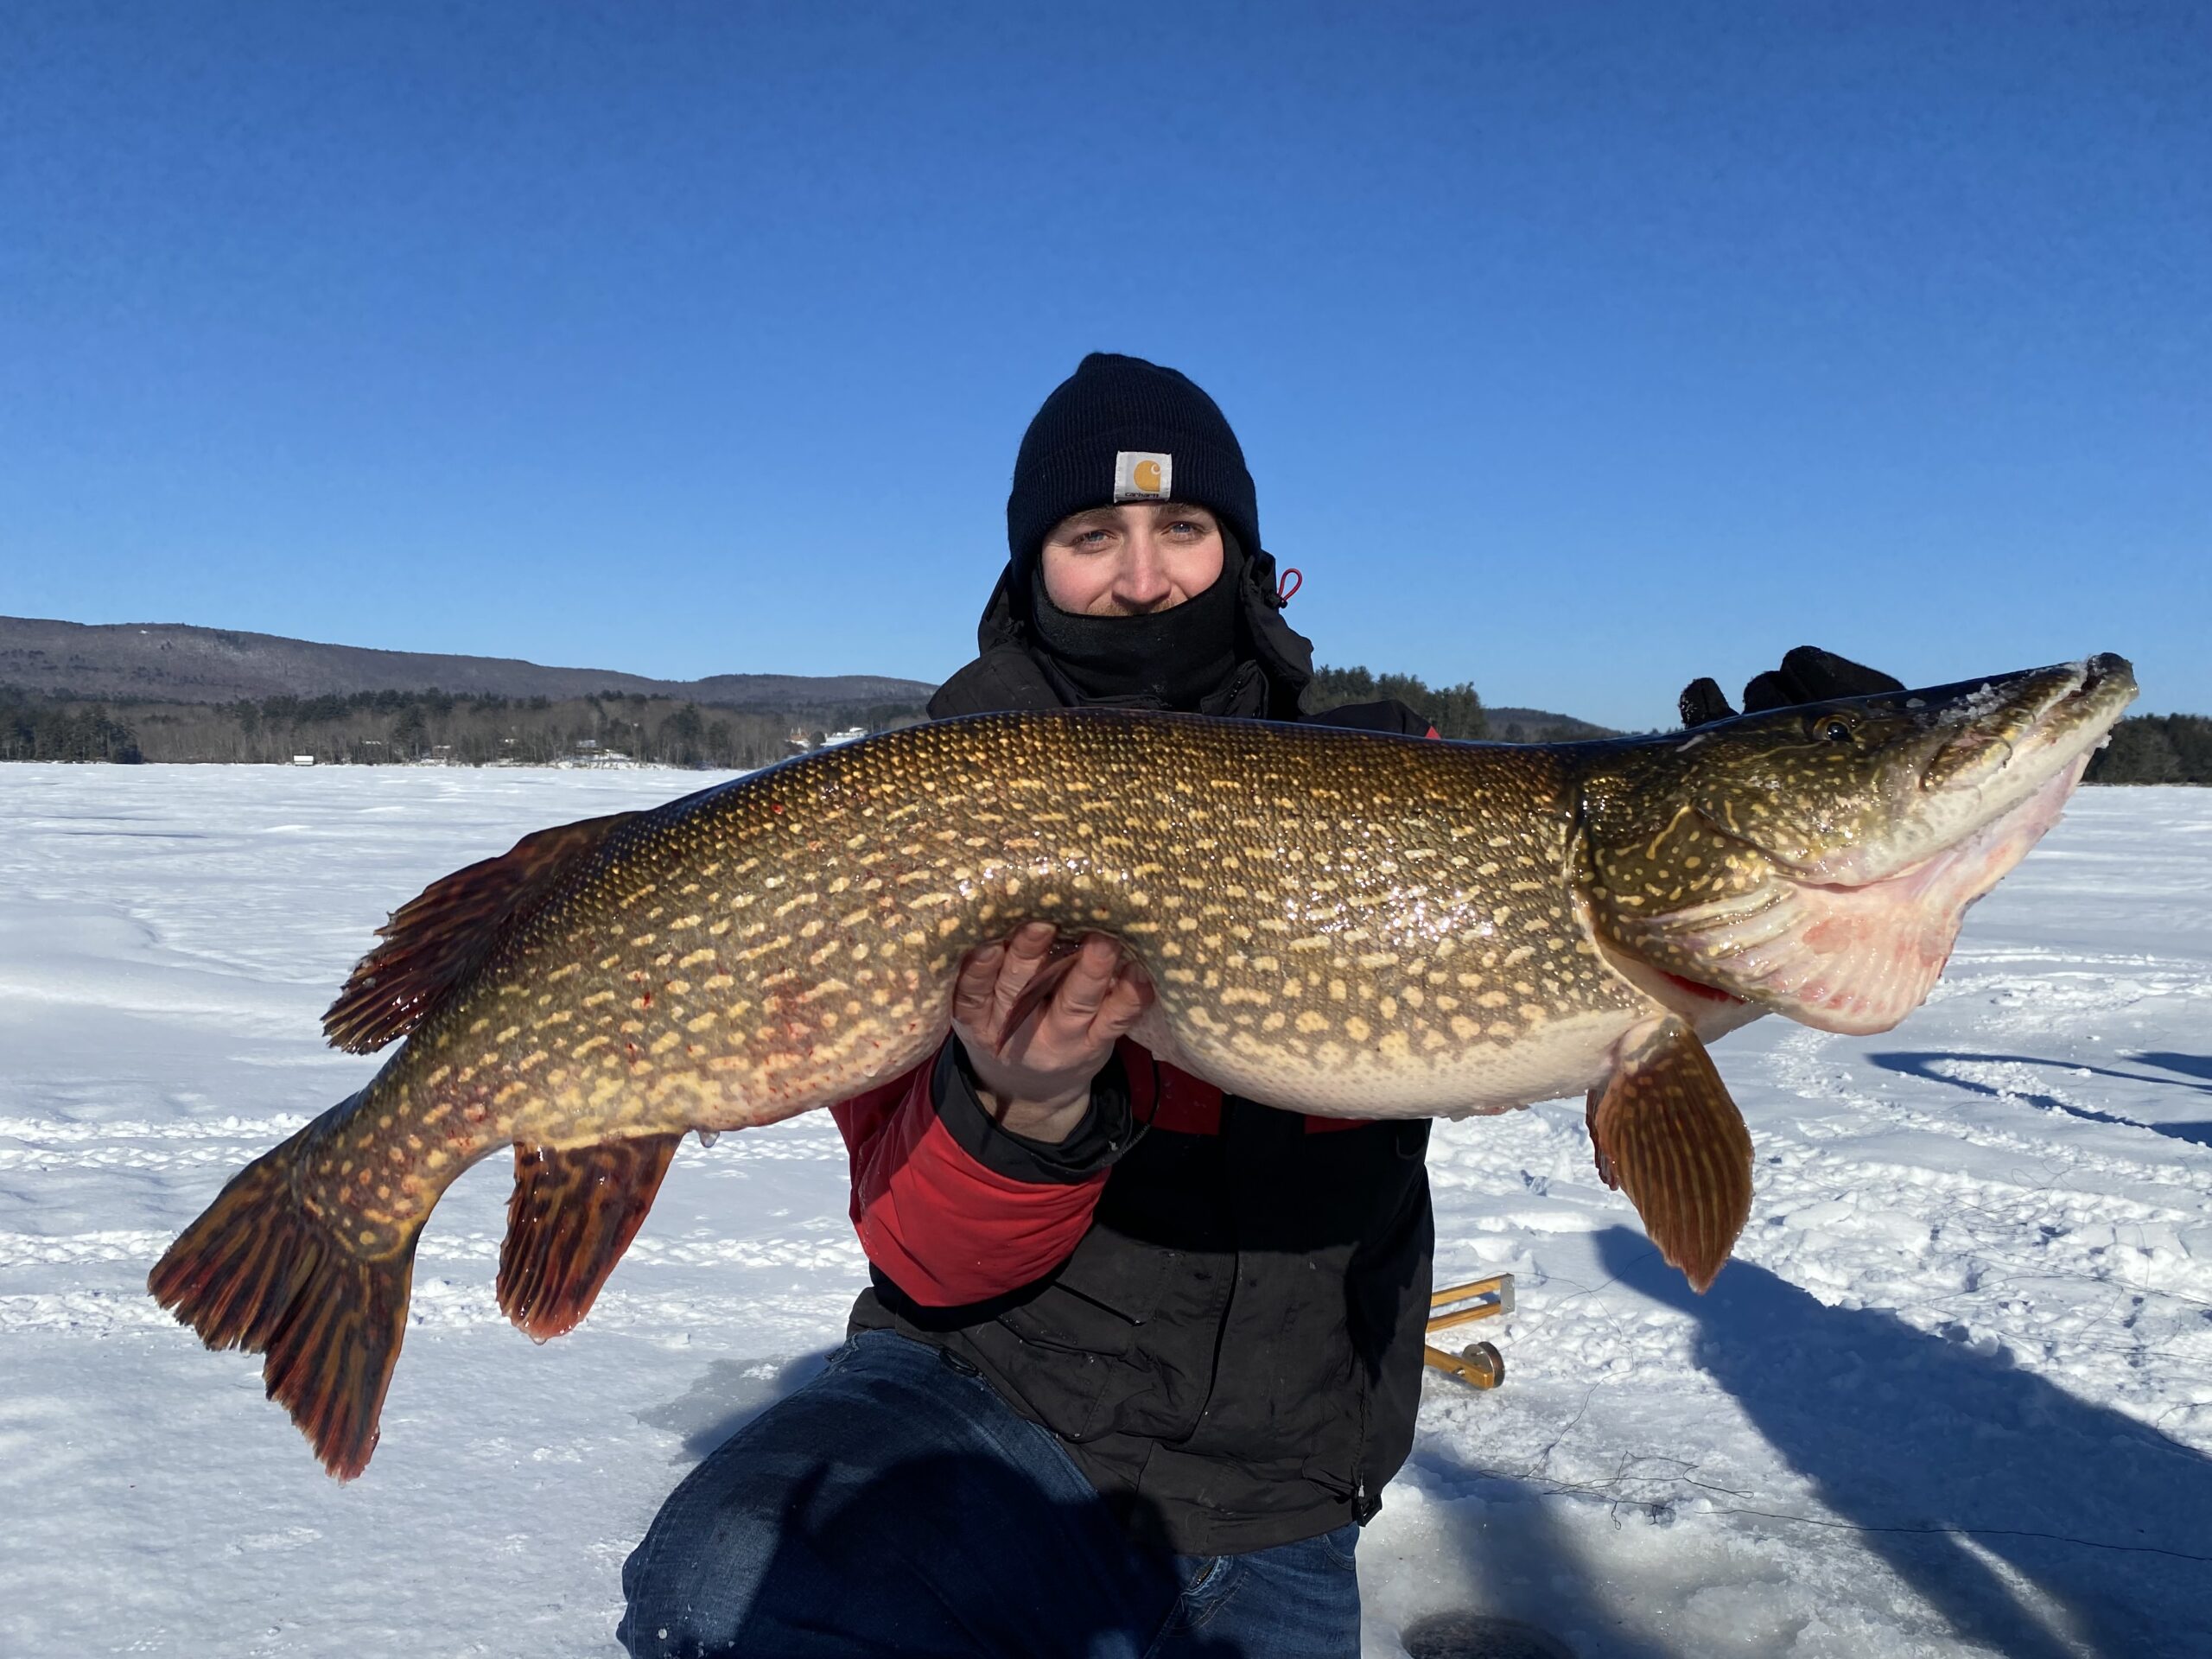 Two Maine anglers teamed up to catch this pike.